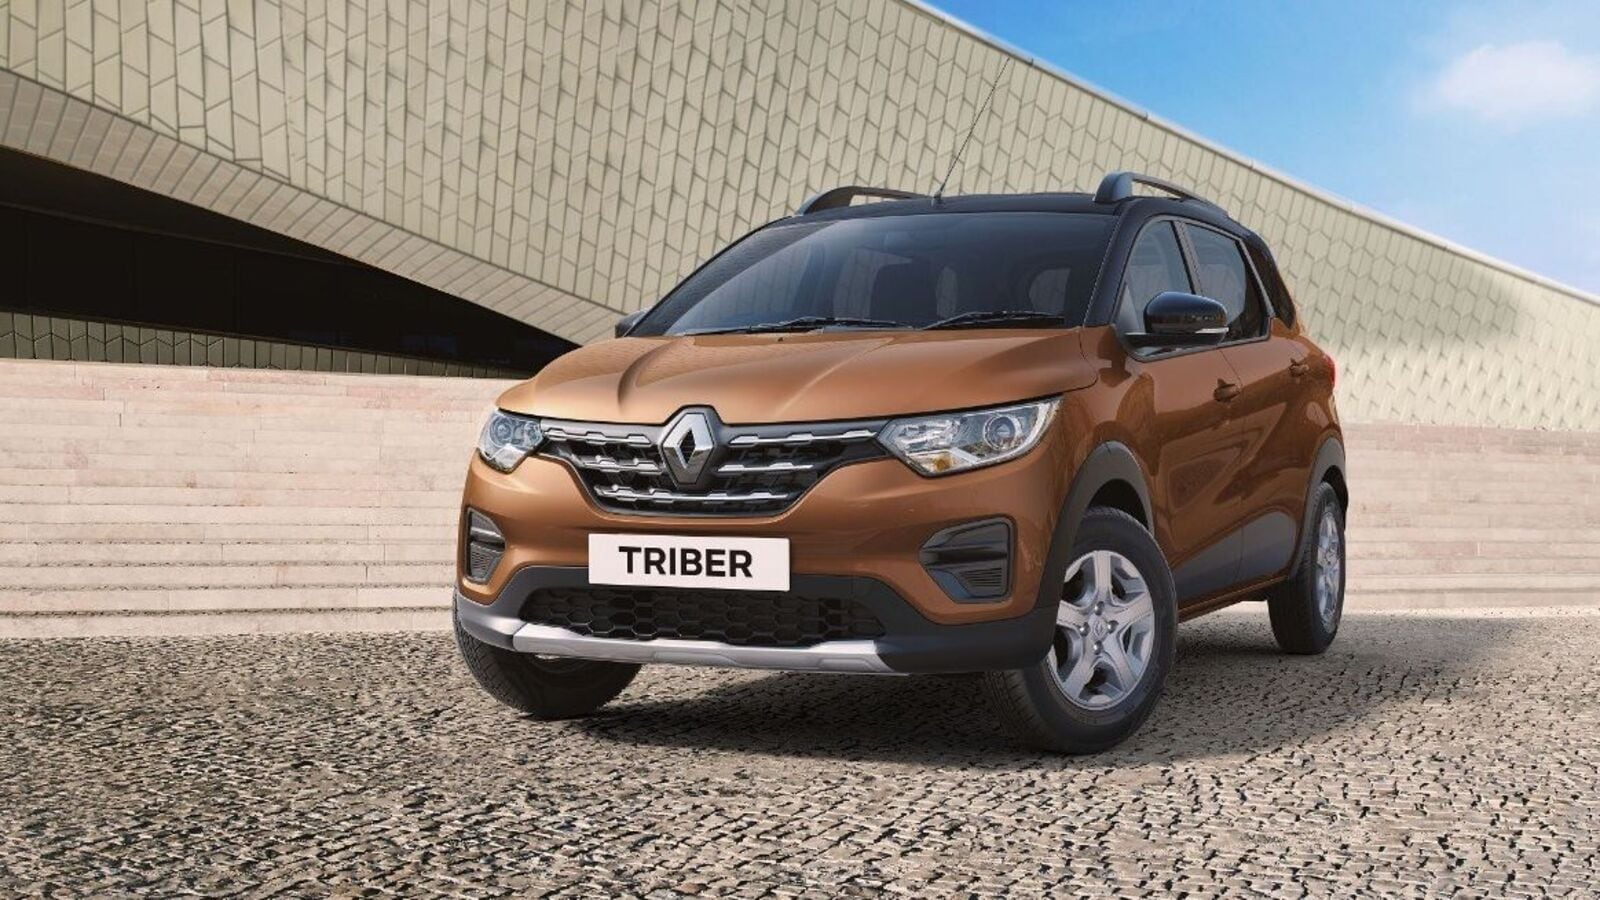 Planning To Buy A Used Renault Triber? You Should Know About Pros